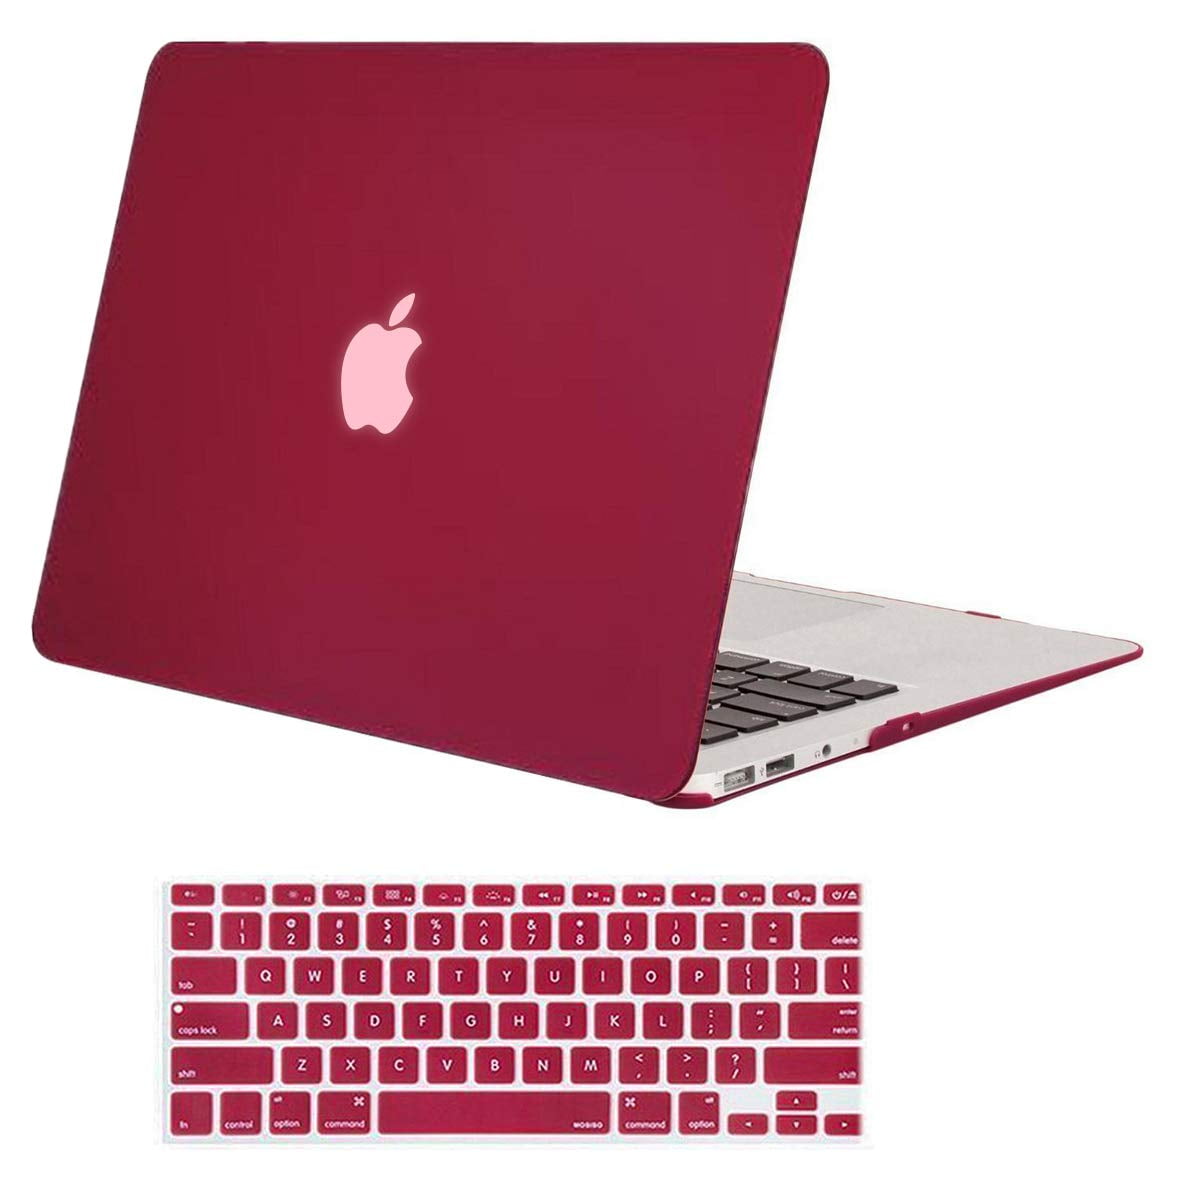 High-Definition Printing Technology can Better Restore The Color of The Picture. J ,13 inch A1989 Plume 13-inch A1706 / A1708 / A1989 / A2159 Protective Cover for Apple laptops 